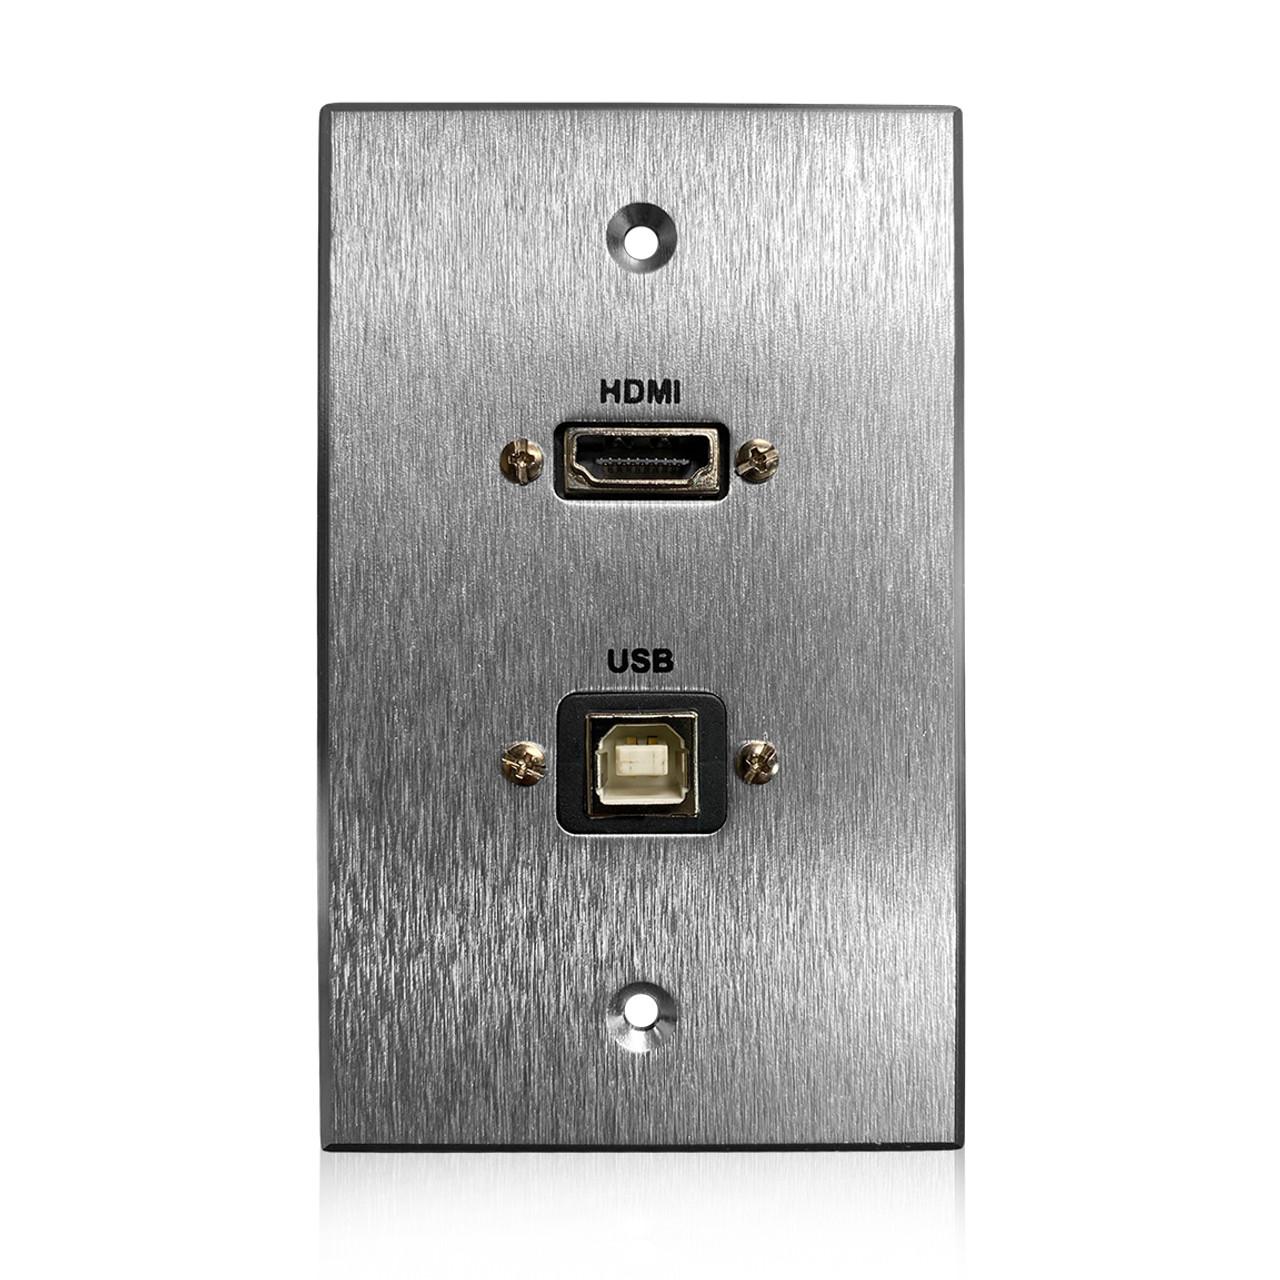 HDMI and USB-C 3.0 Pass-Through Single Gang Decorative Wall Plate